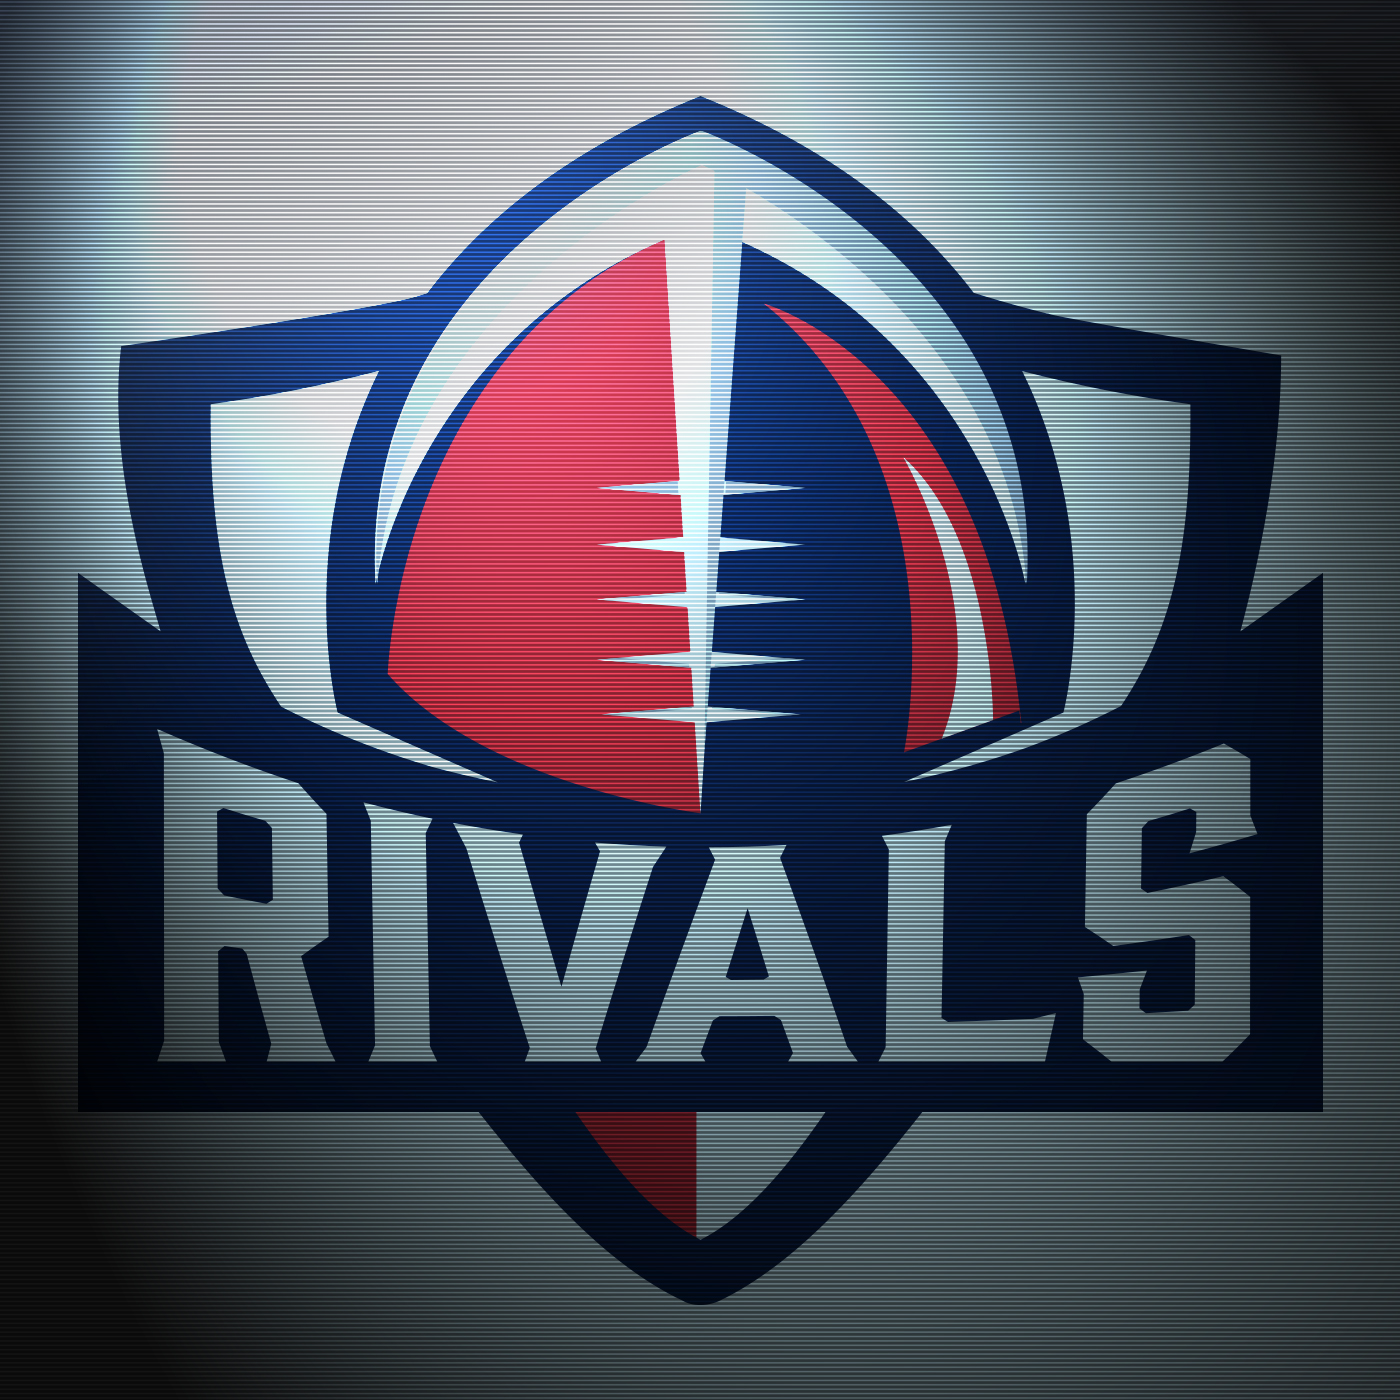 Best Of: Rivals Choose If You Had To Switch Sides - What Position Would It Be